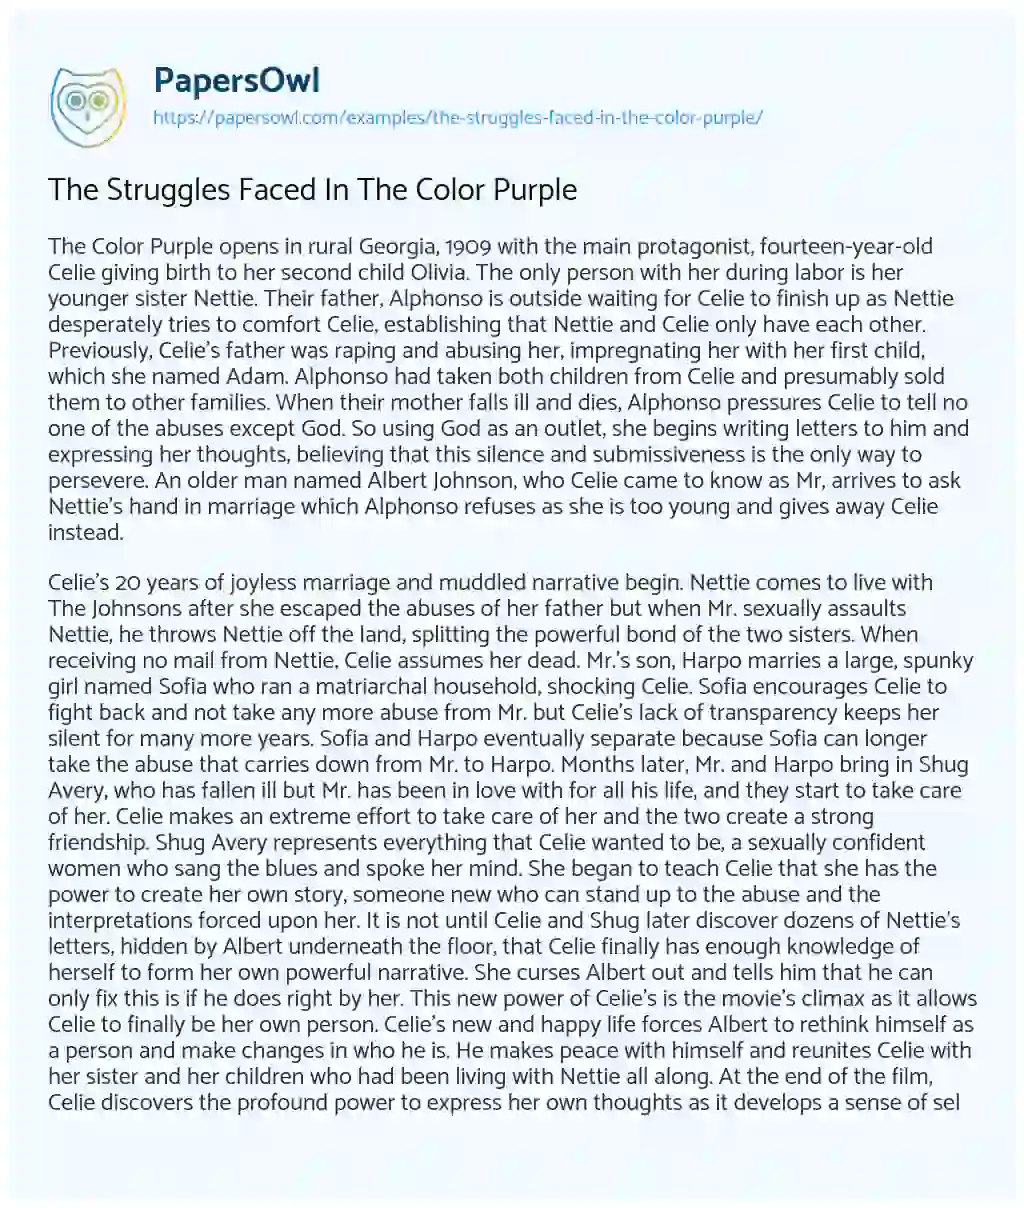 Essay on The Struggles Faced in the Color Purple